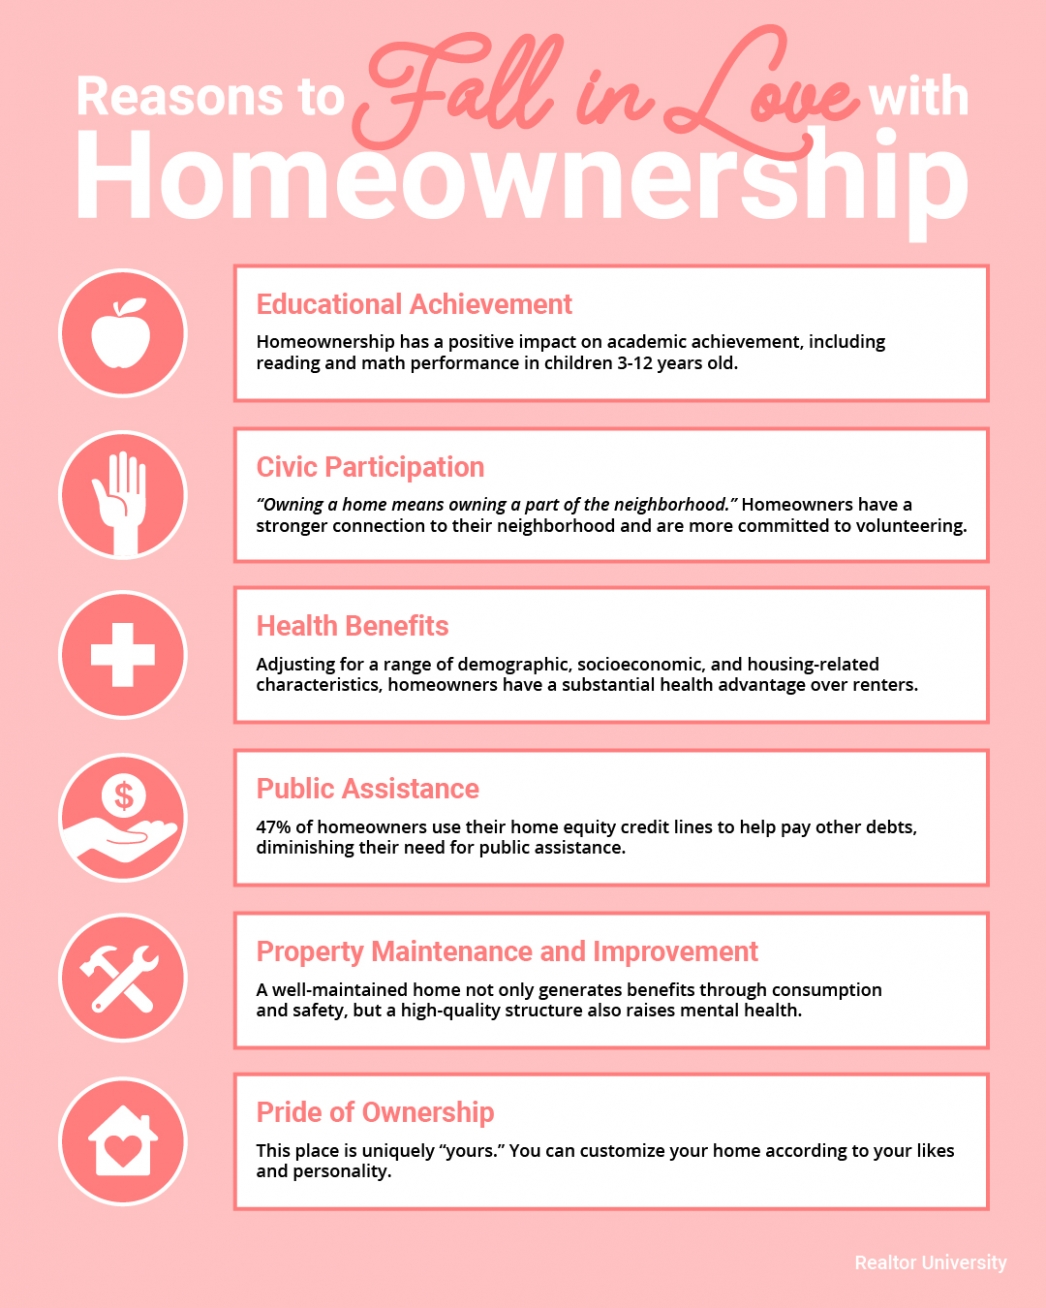 Reasons to Fall in Love with Homeownership